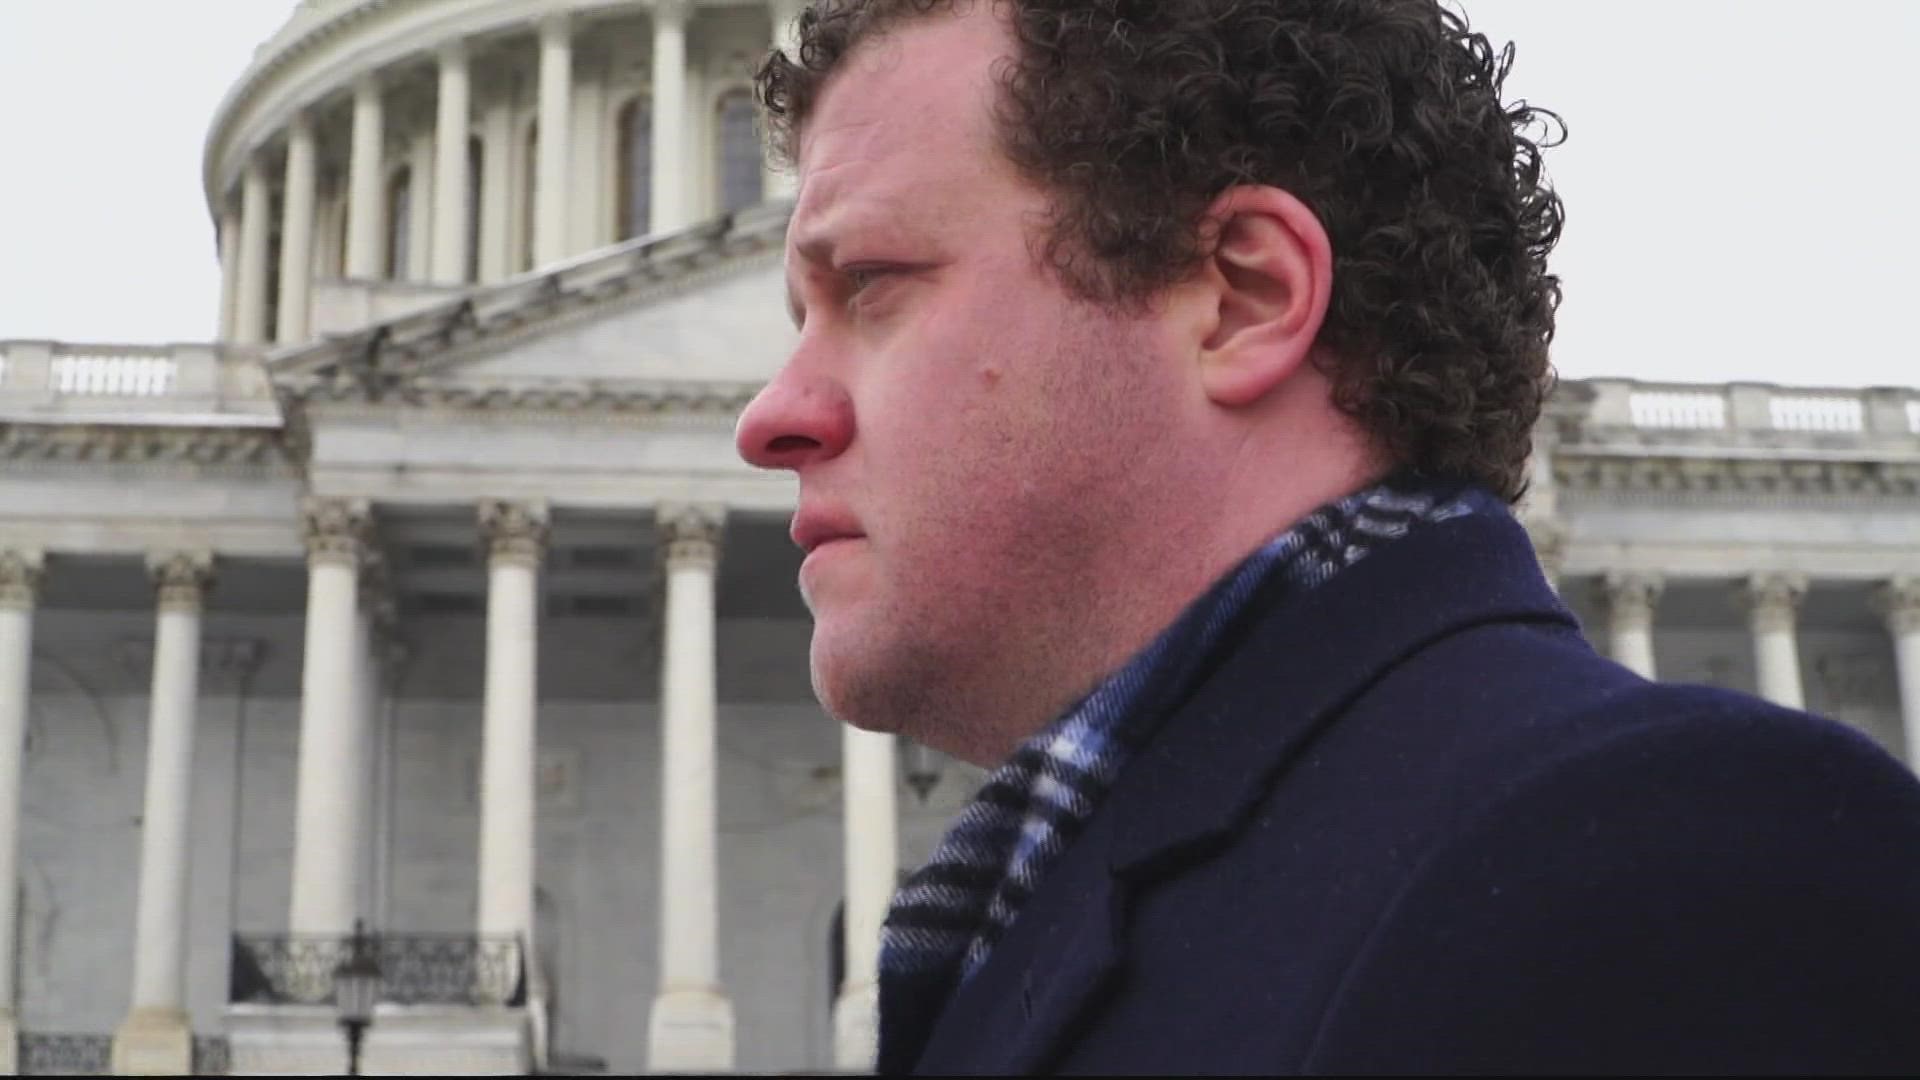 WUSA9's Eric Flack talks to former and current Hill staffers still grappling with the trauma of the attacks on the U.S. Capitol on January 6.